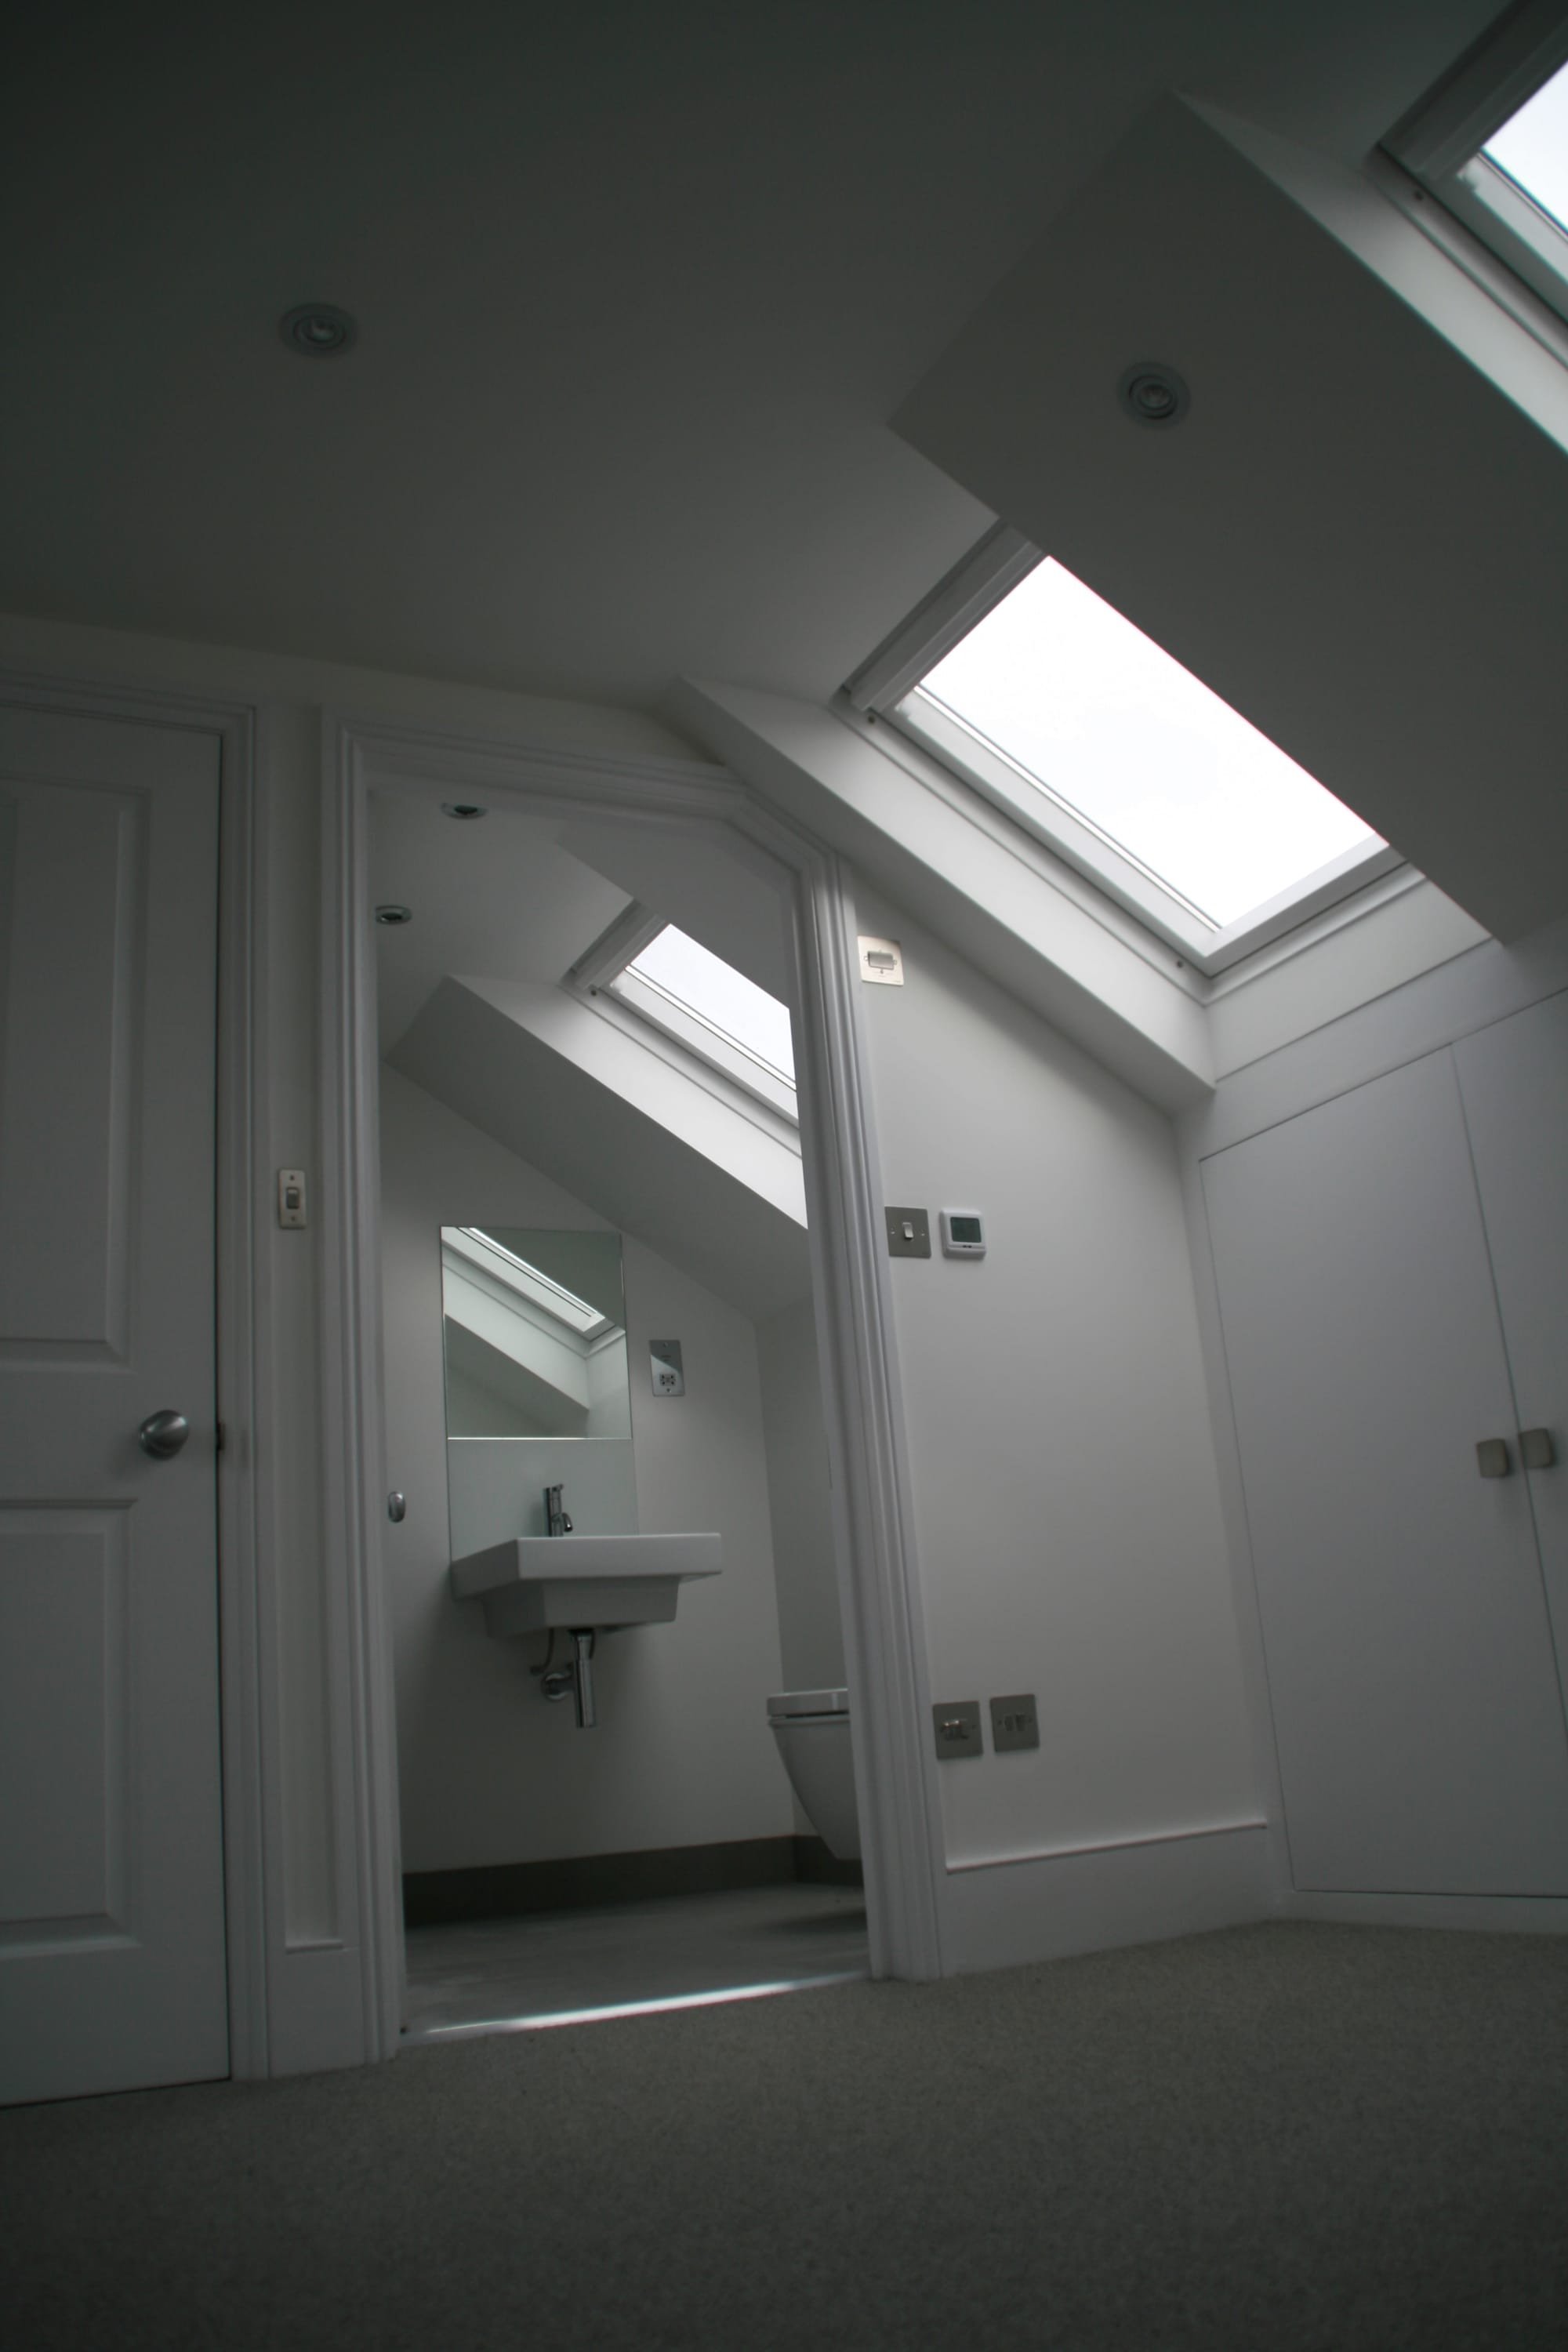 Velux windows maximise the natural light into both loft bedroom and en-suite shower room in this SW11 loft conversion extension